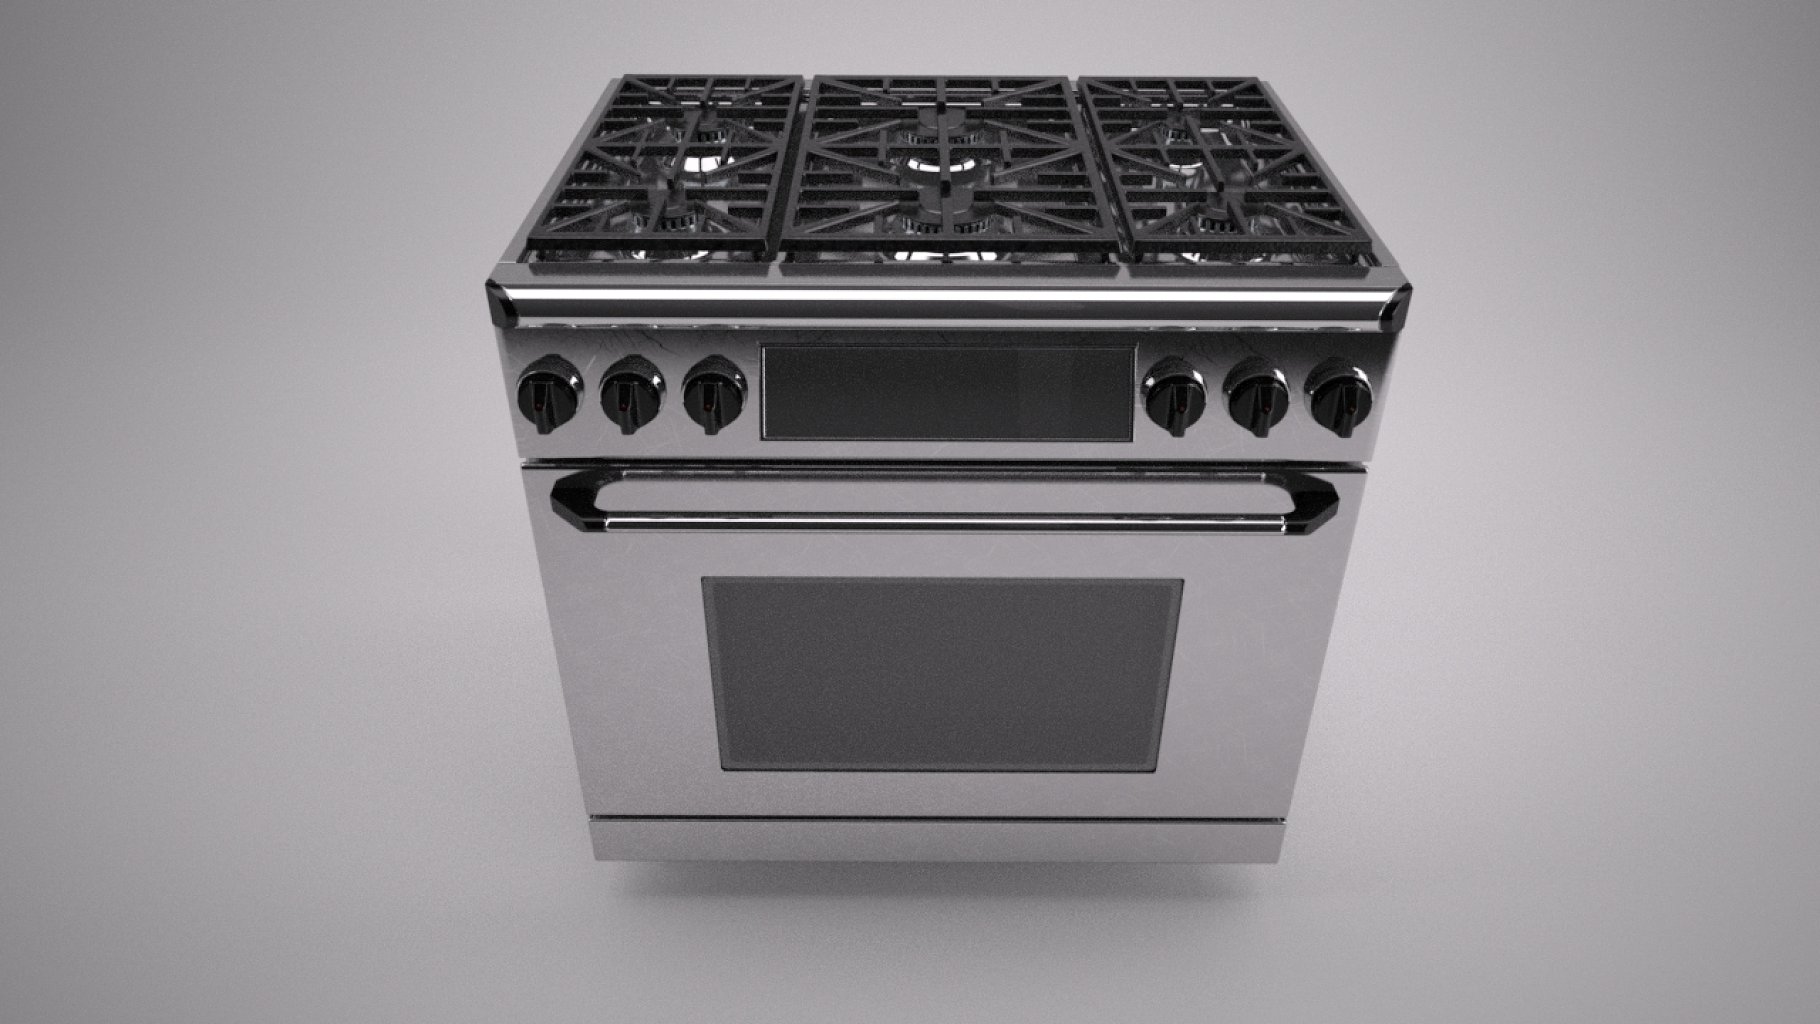 The image of the front of the gas stove.